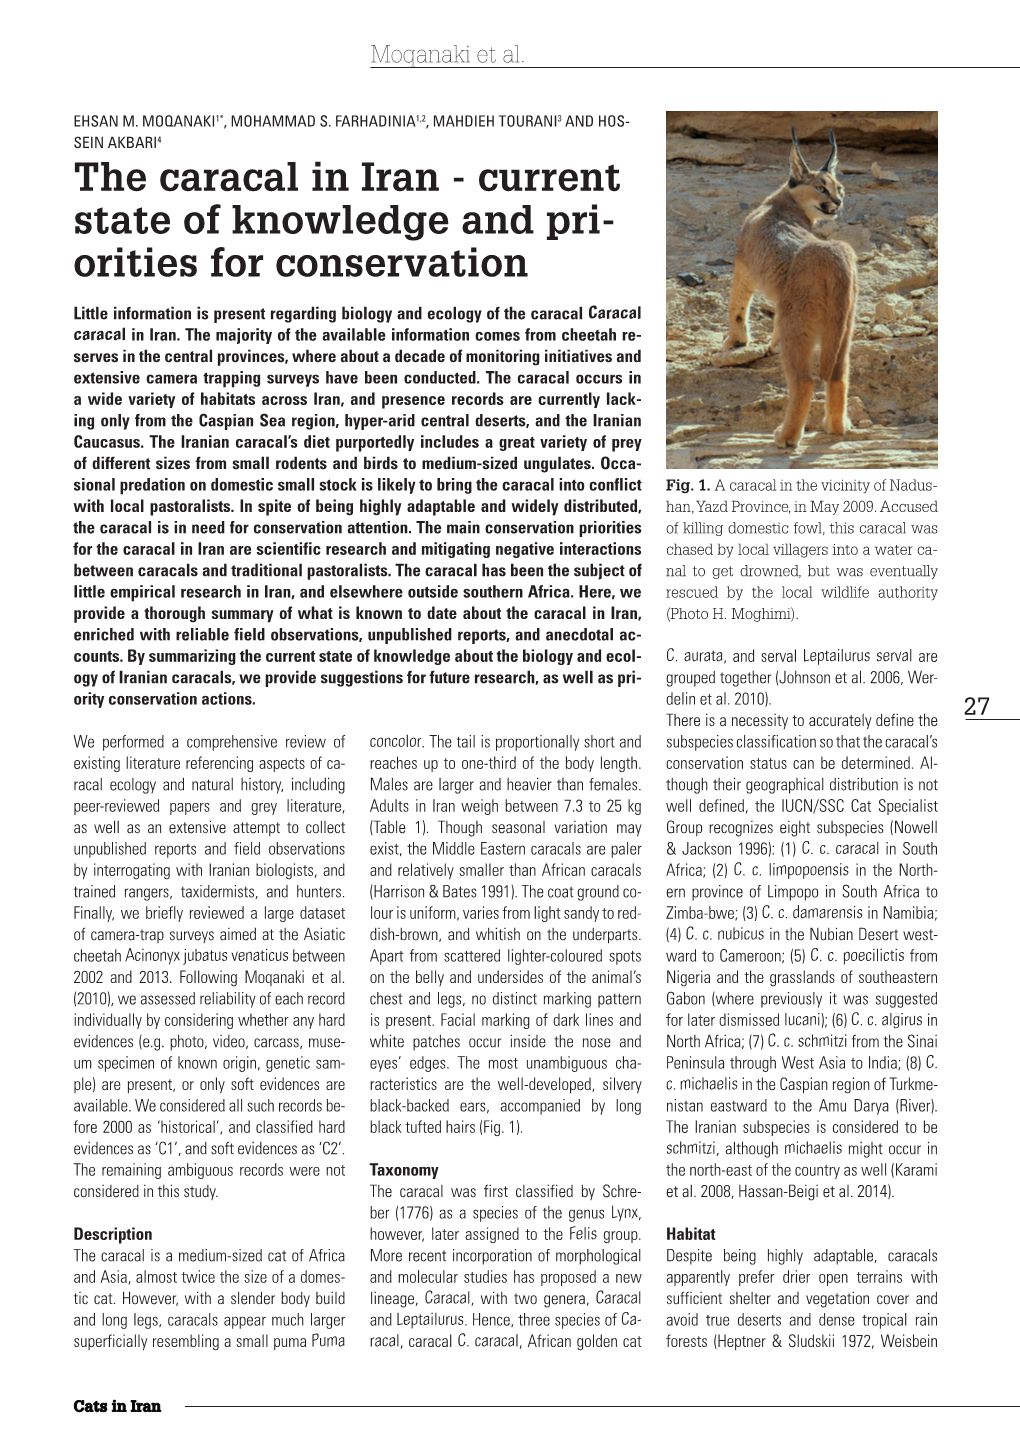 The Caracal in Iran - Current State of Knowledge and Pri- Orities for Conservation